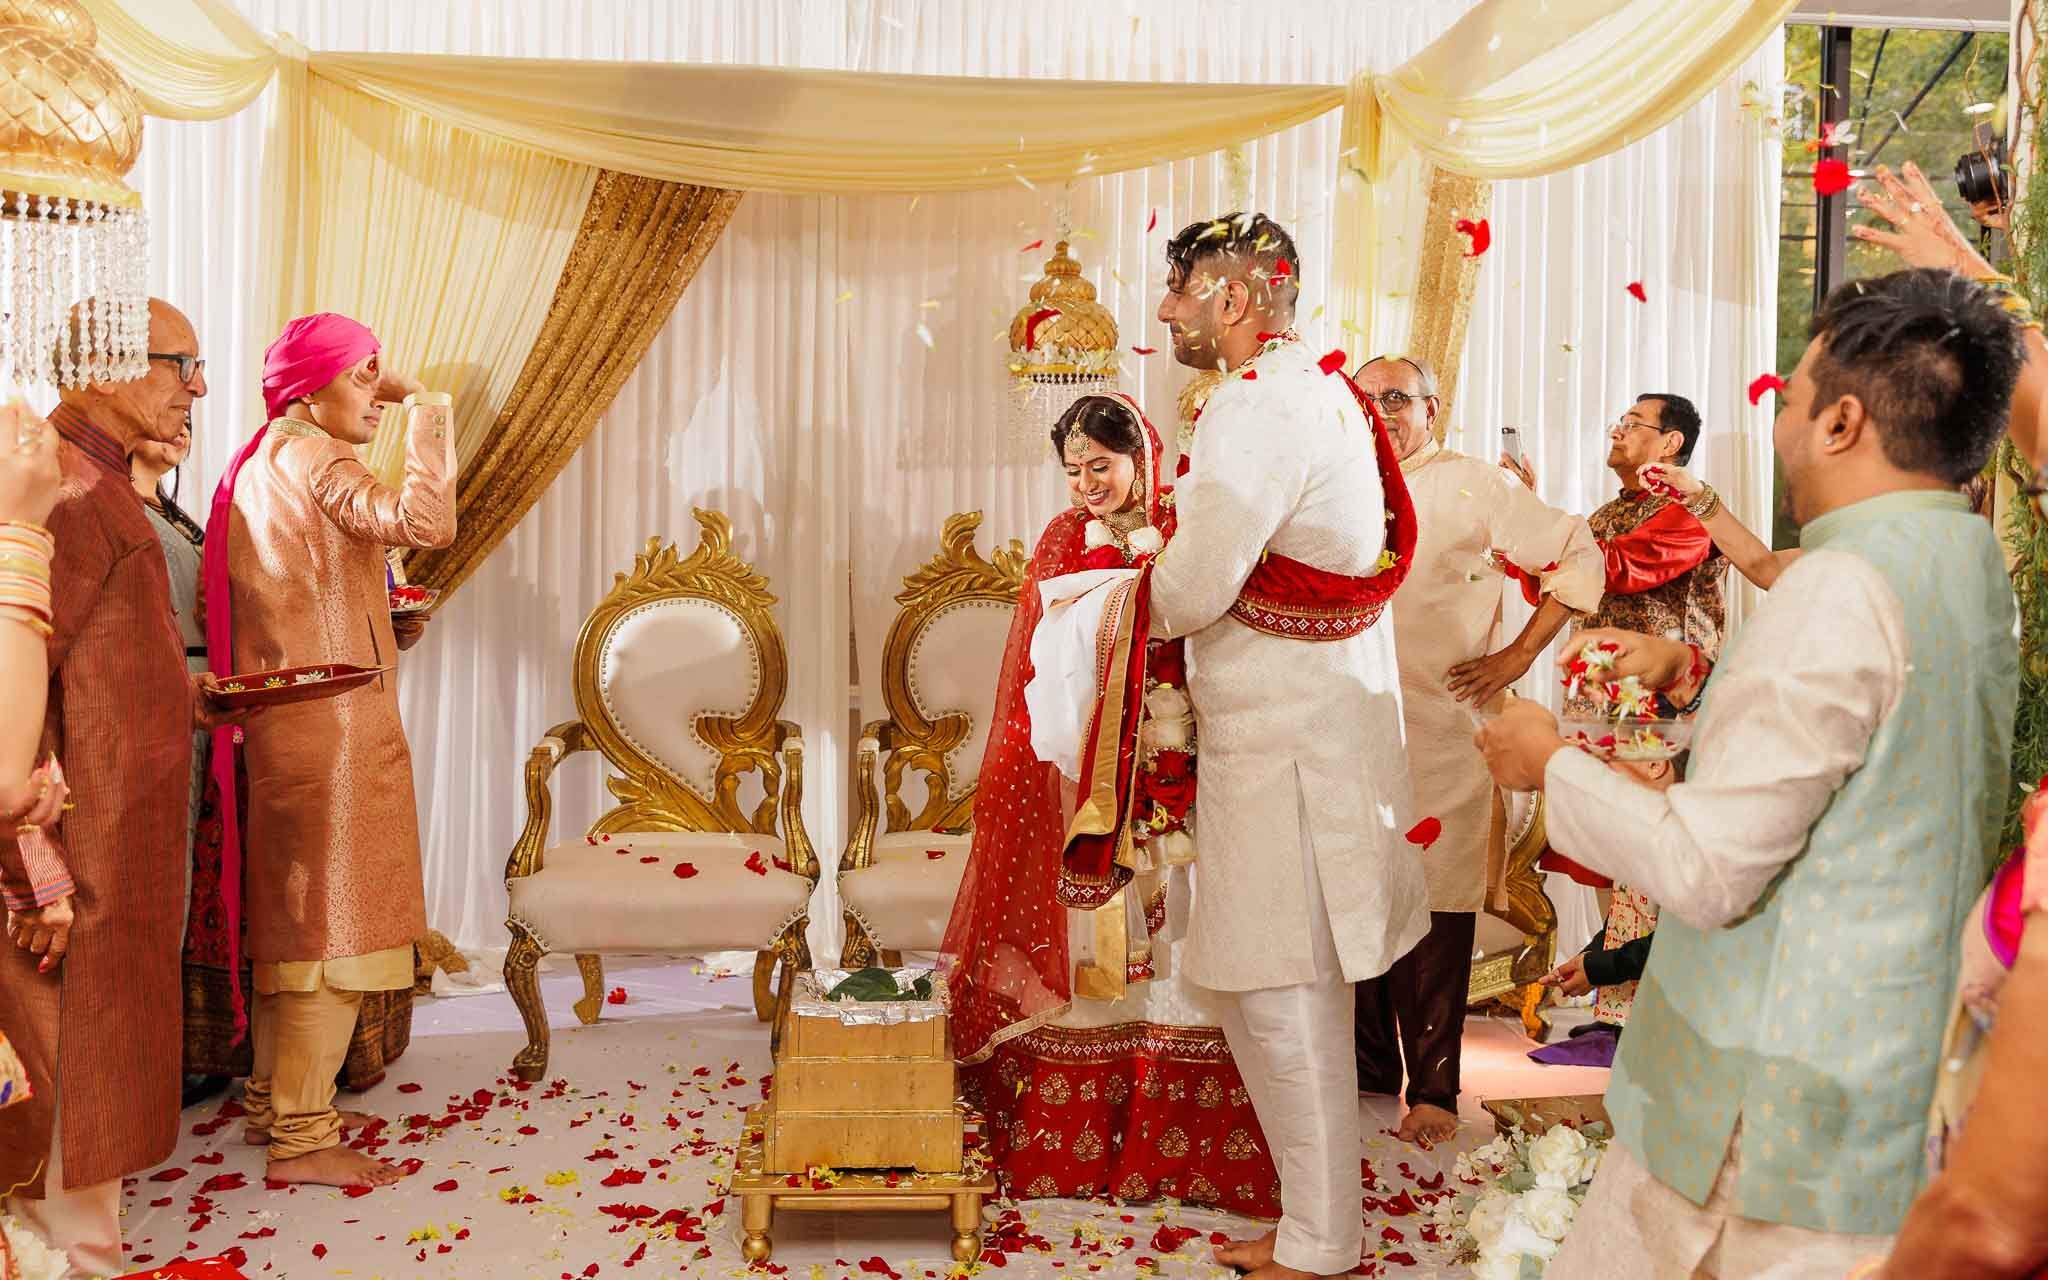  Indian bride and groom taking fera, a part of Indian wedding ceremoy 